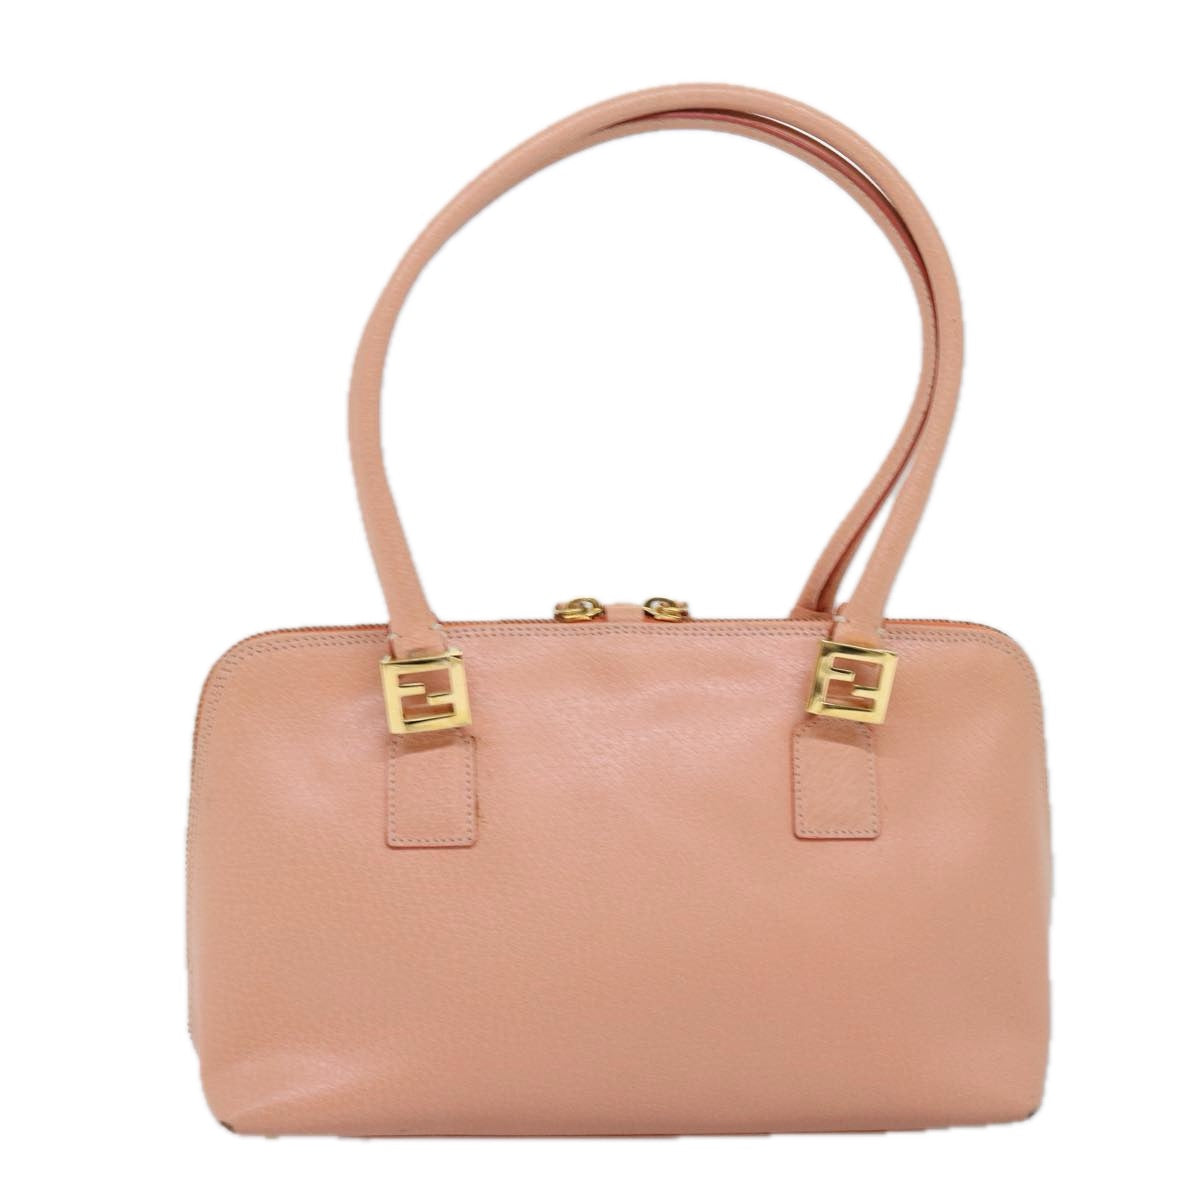 FENDI Hand Bag Leather Pink Auth 73857 - 0